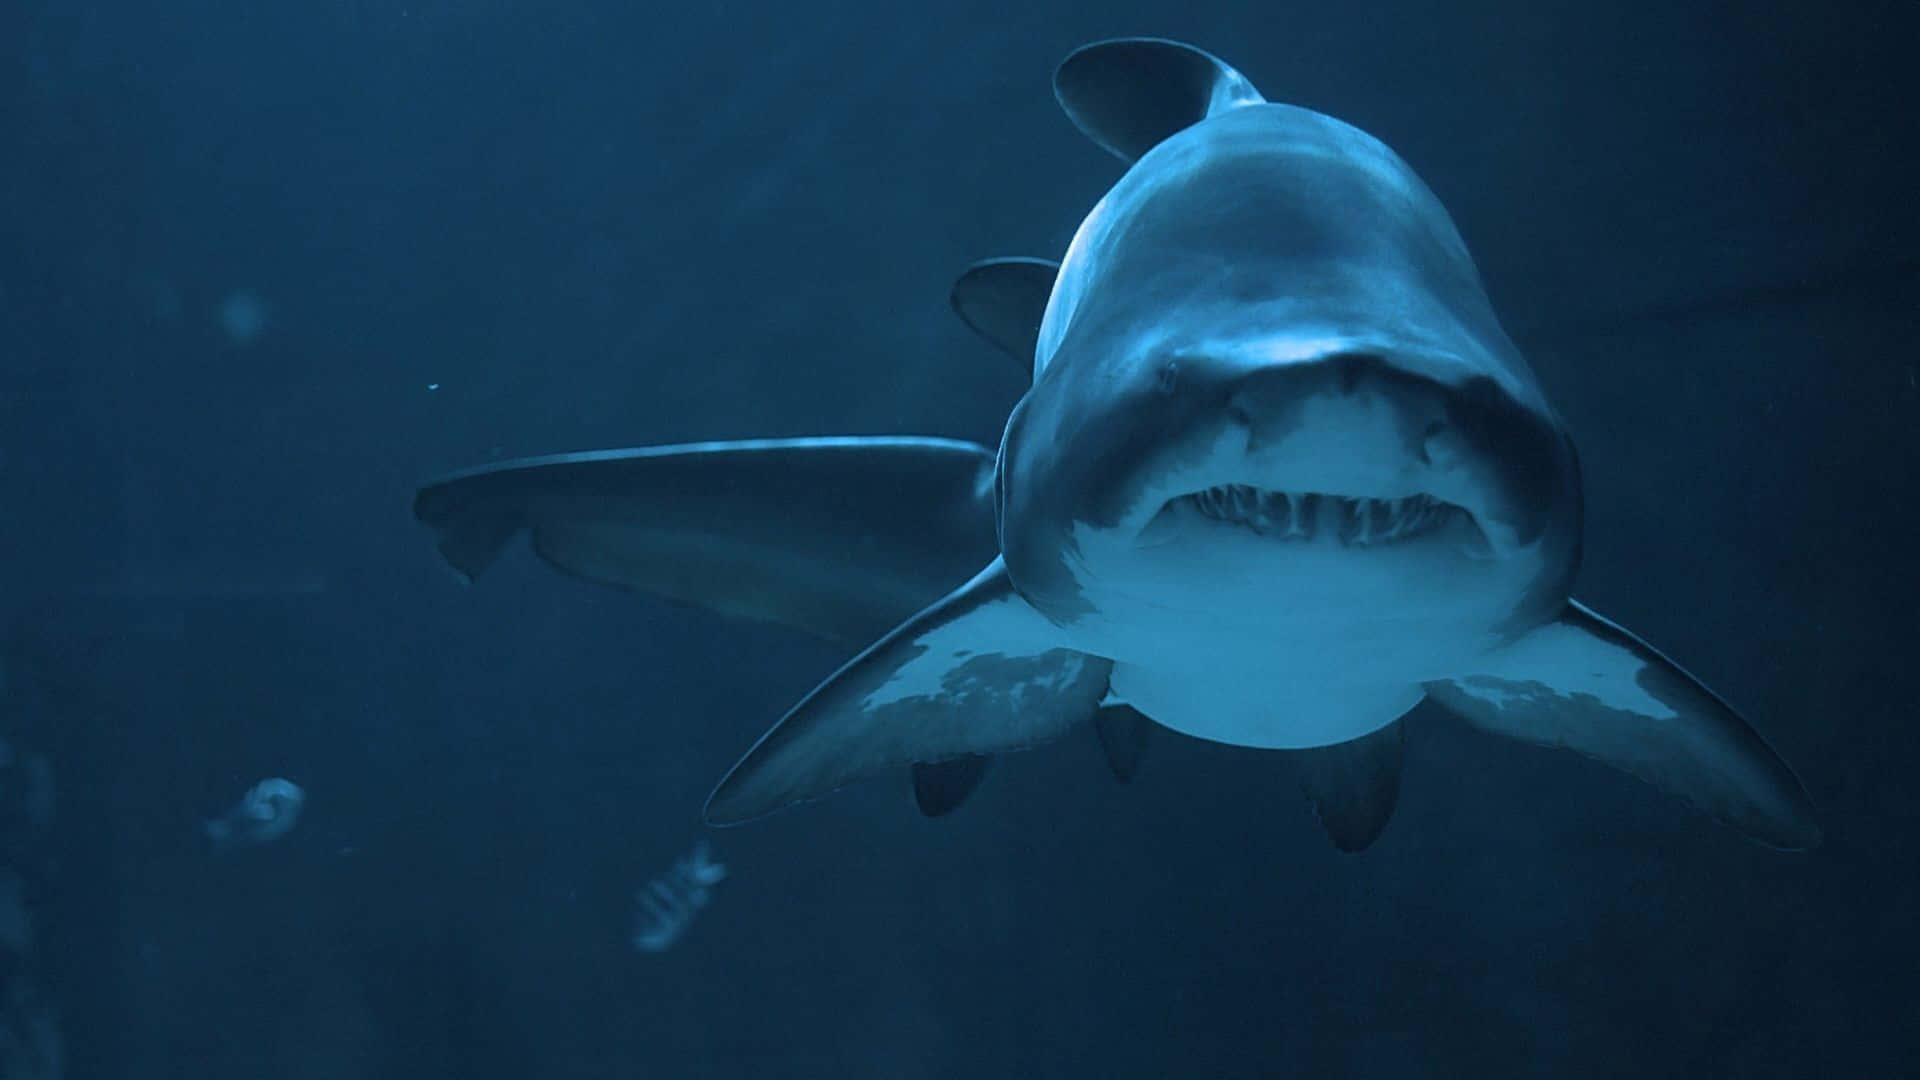 A Shark Swimming In The Water With Its Mouth Open